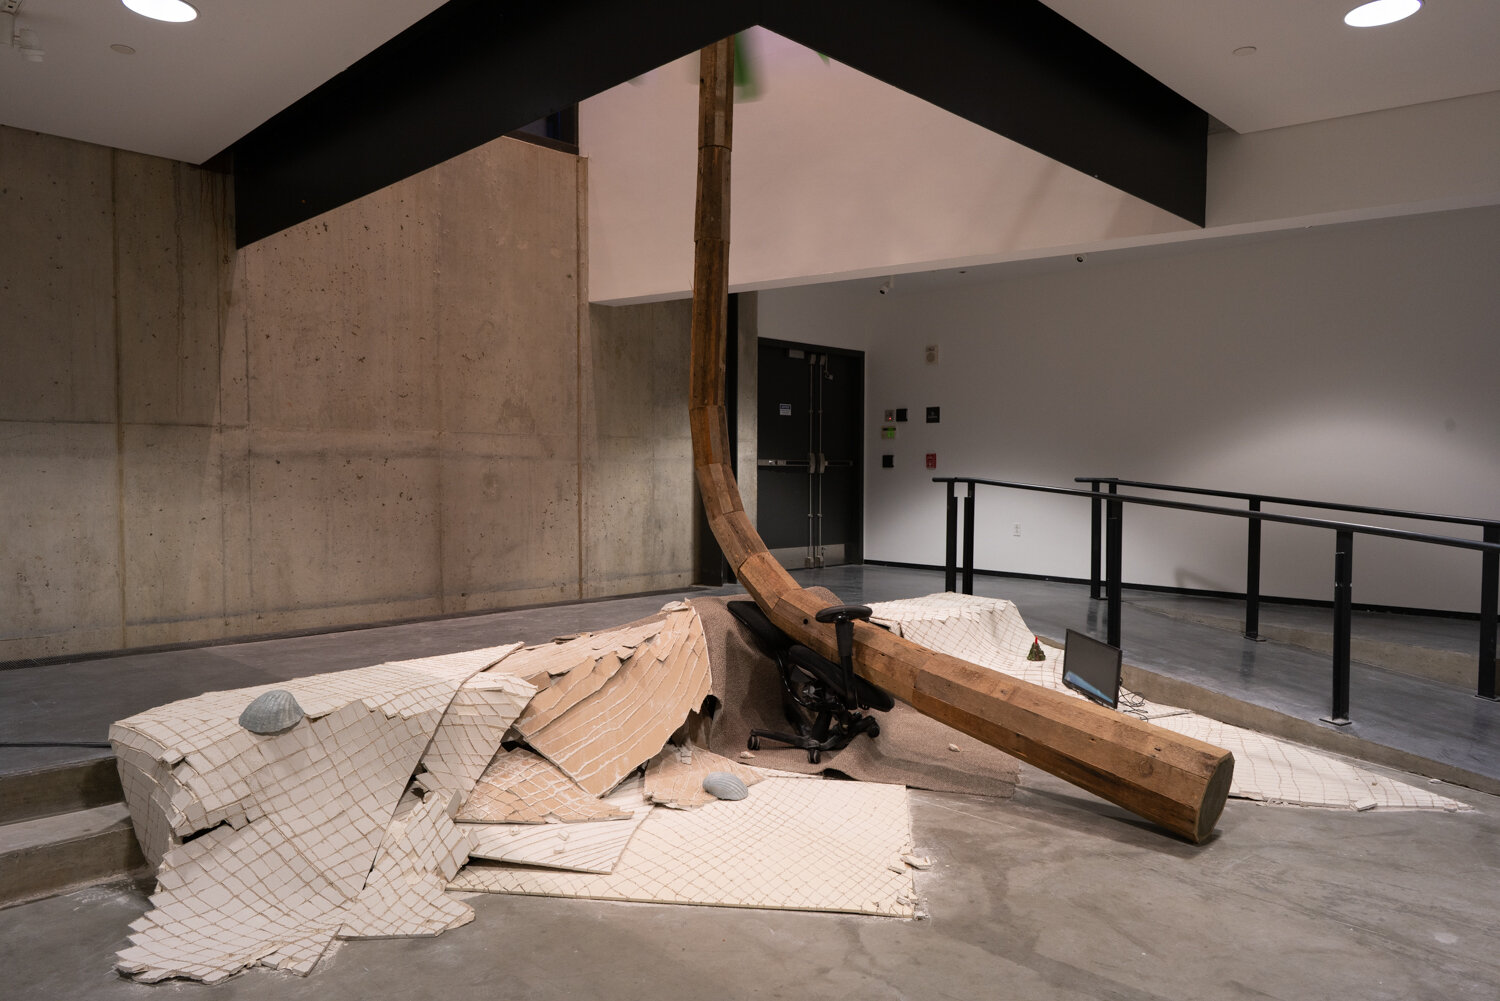  Alex Zak  Swamped , 2019 Sheet rock, plaster wrap, carpet, wood, steel, aluminum, paint, cement, sand, oven-bake clay,   office chair, modified ceiling fan, Monitor, Keyboard, aquarium volcano, red sharpie 192 x 204 x 196 inches (488 x 305 x 498 cm)